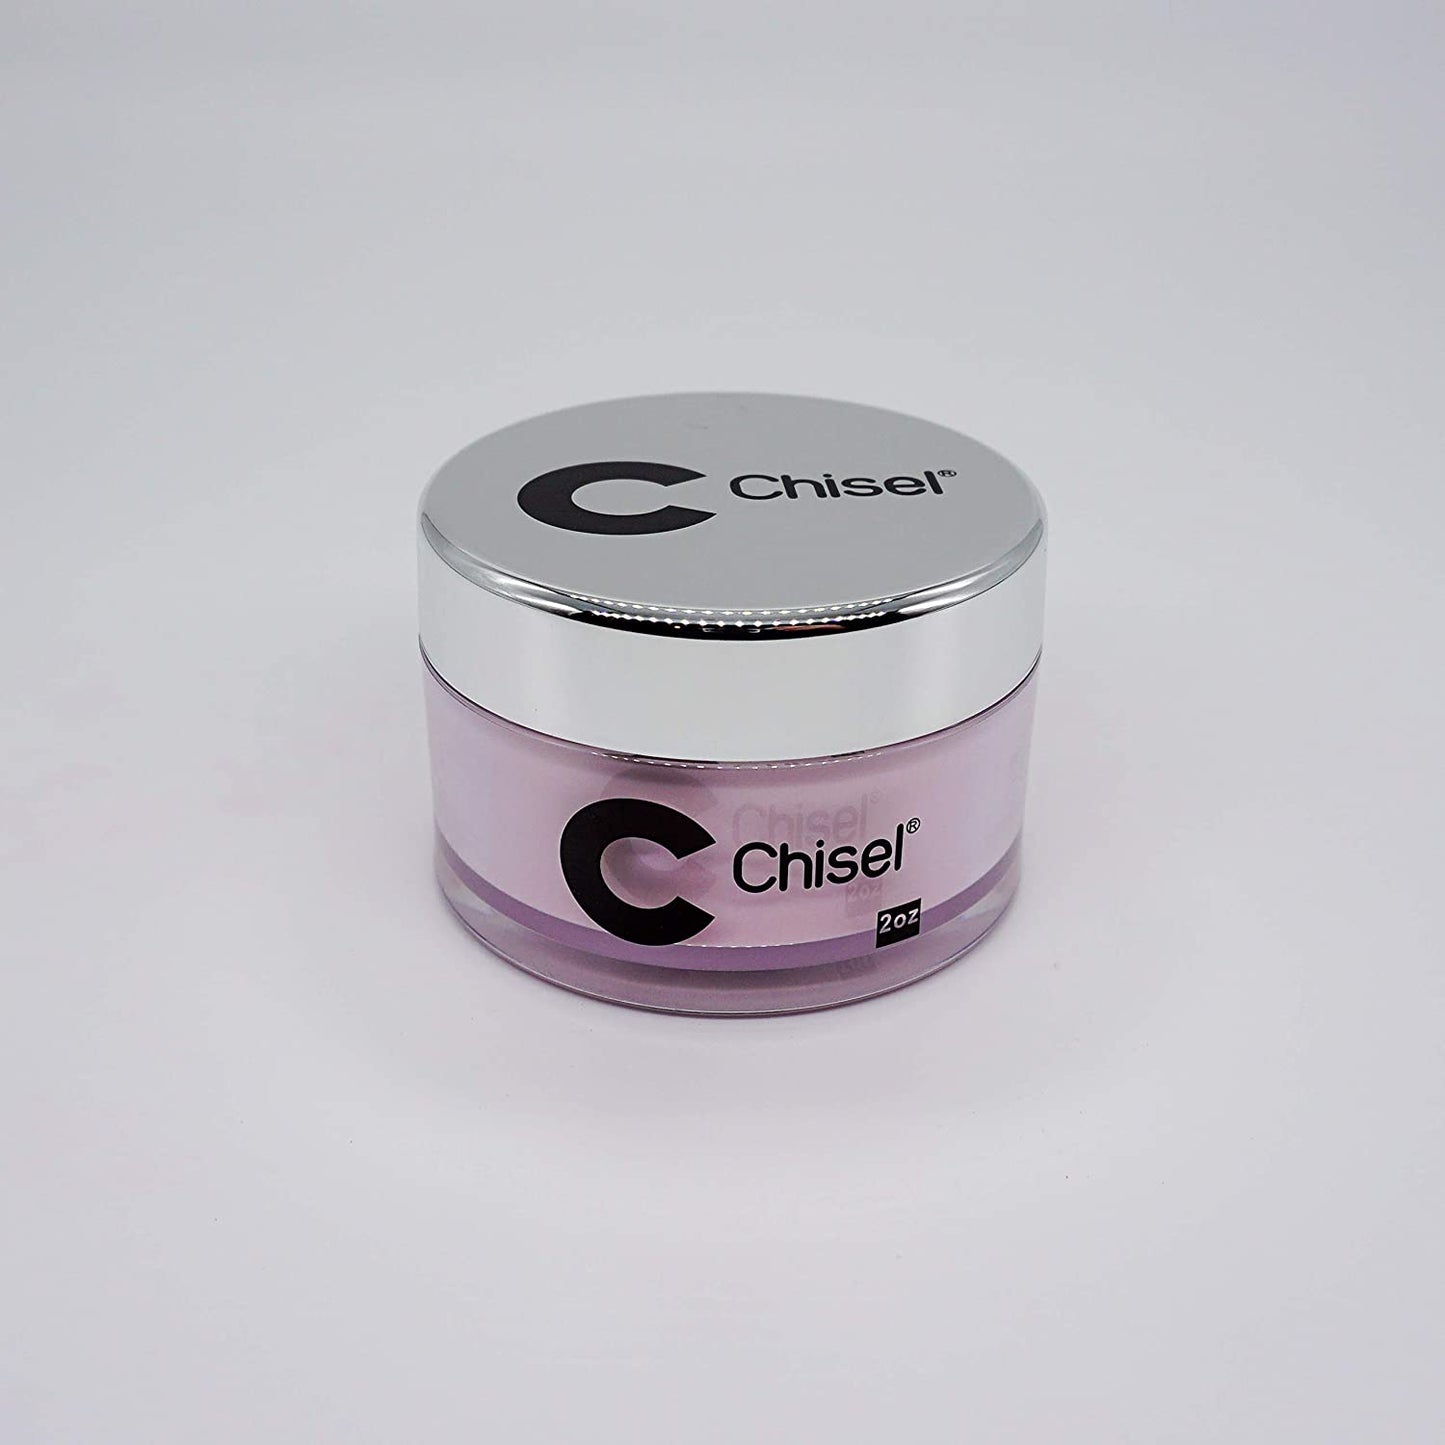 Chisel Nail Art 2 in 1 Acrylic & Dipping Powder Solid #015